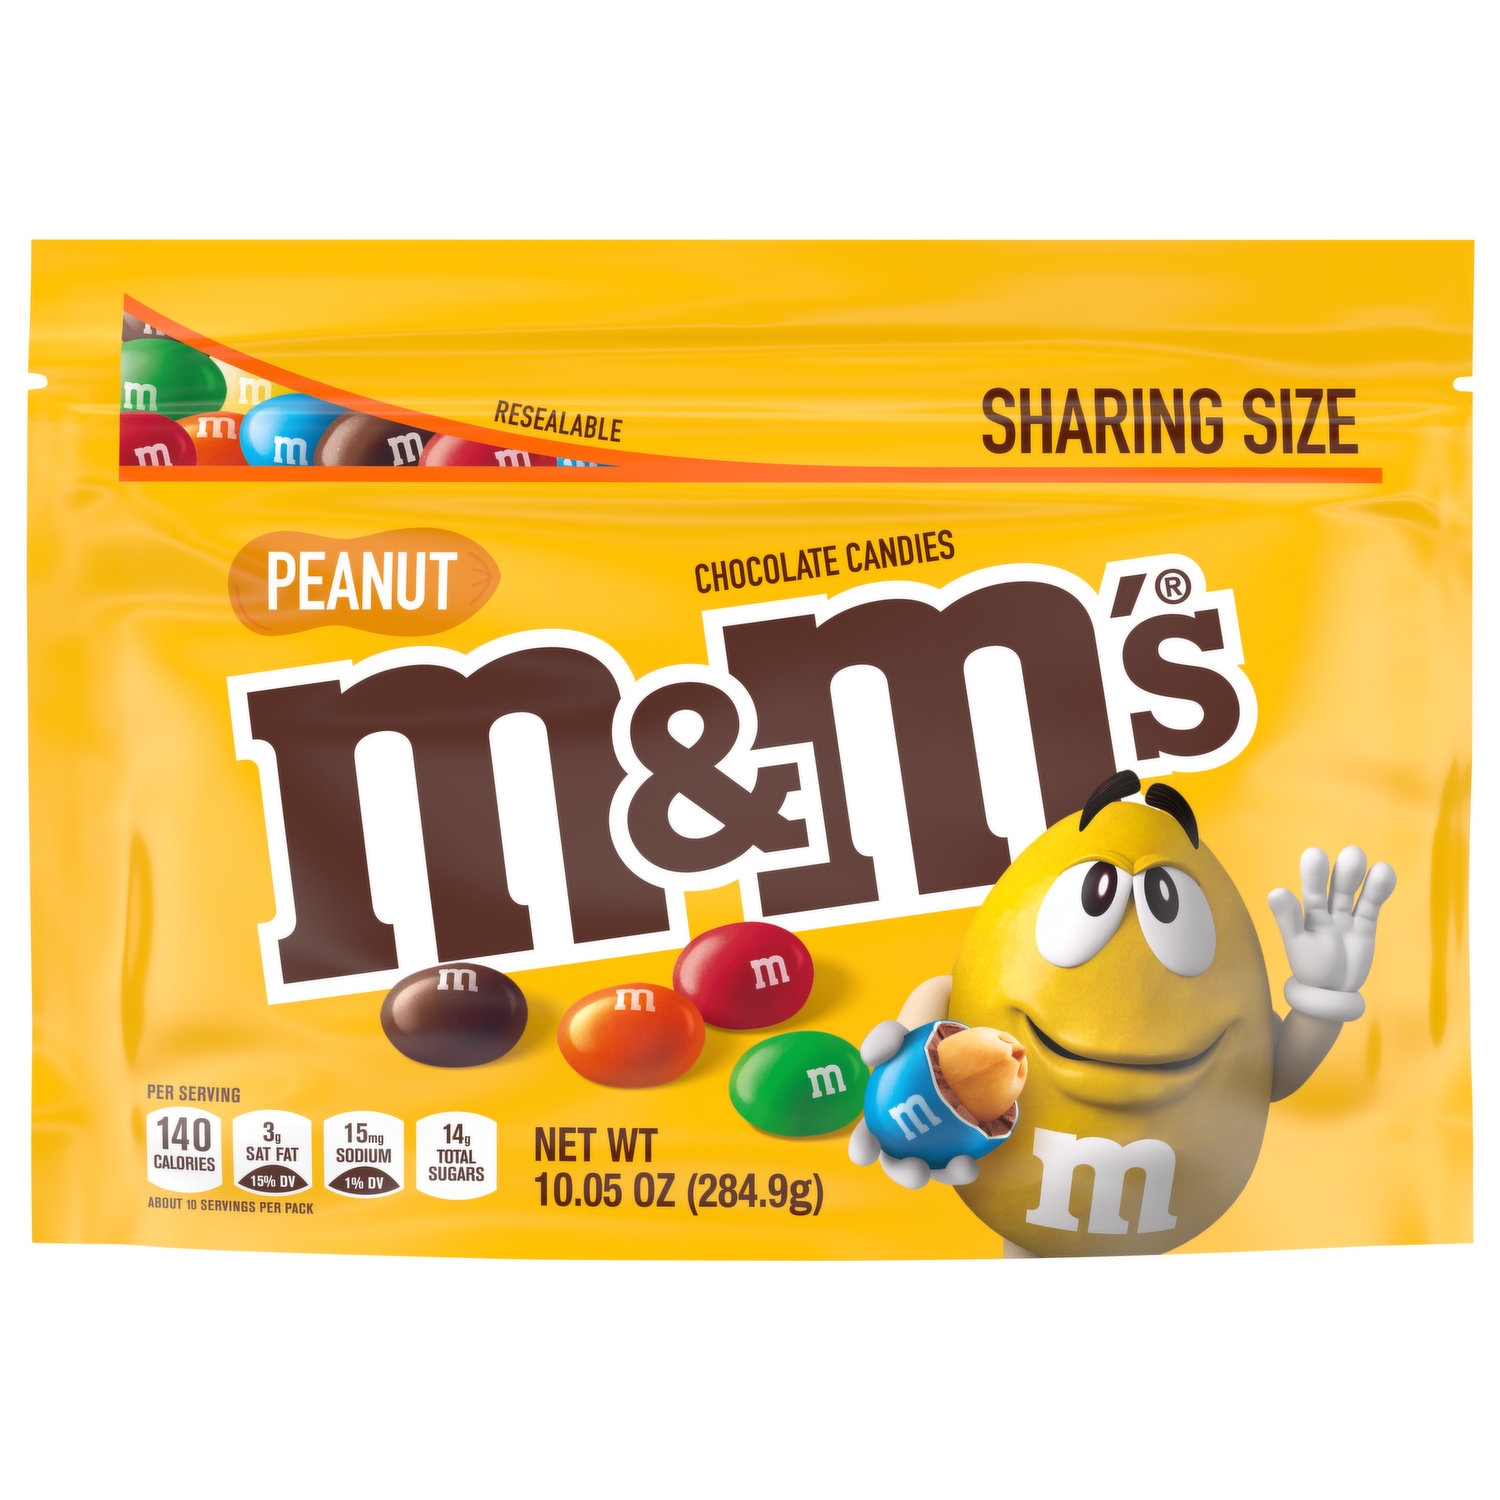 Brand new Peanut M&M's flavor is sure to delight caffeine lovers